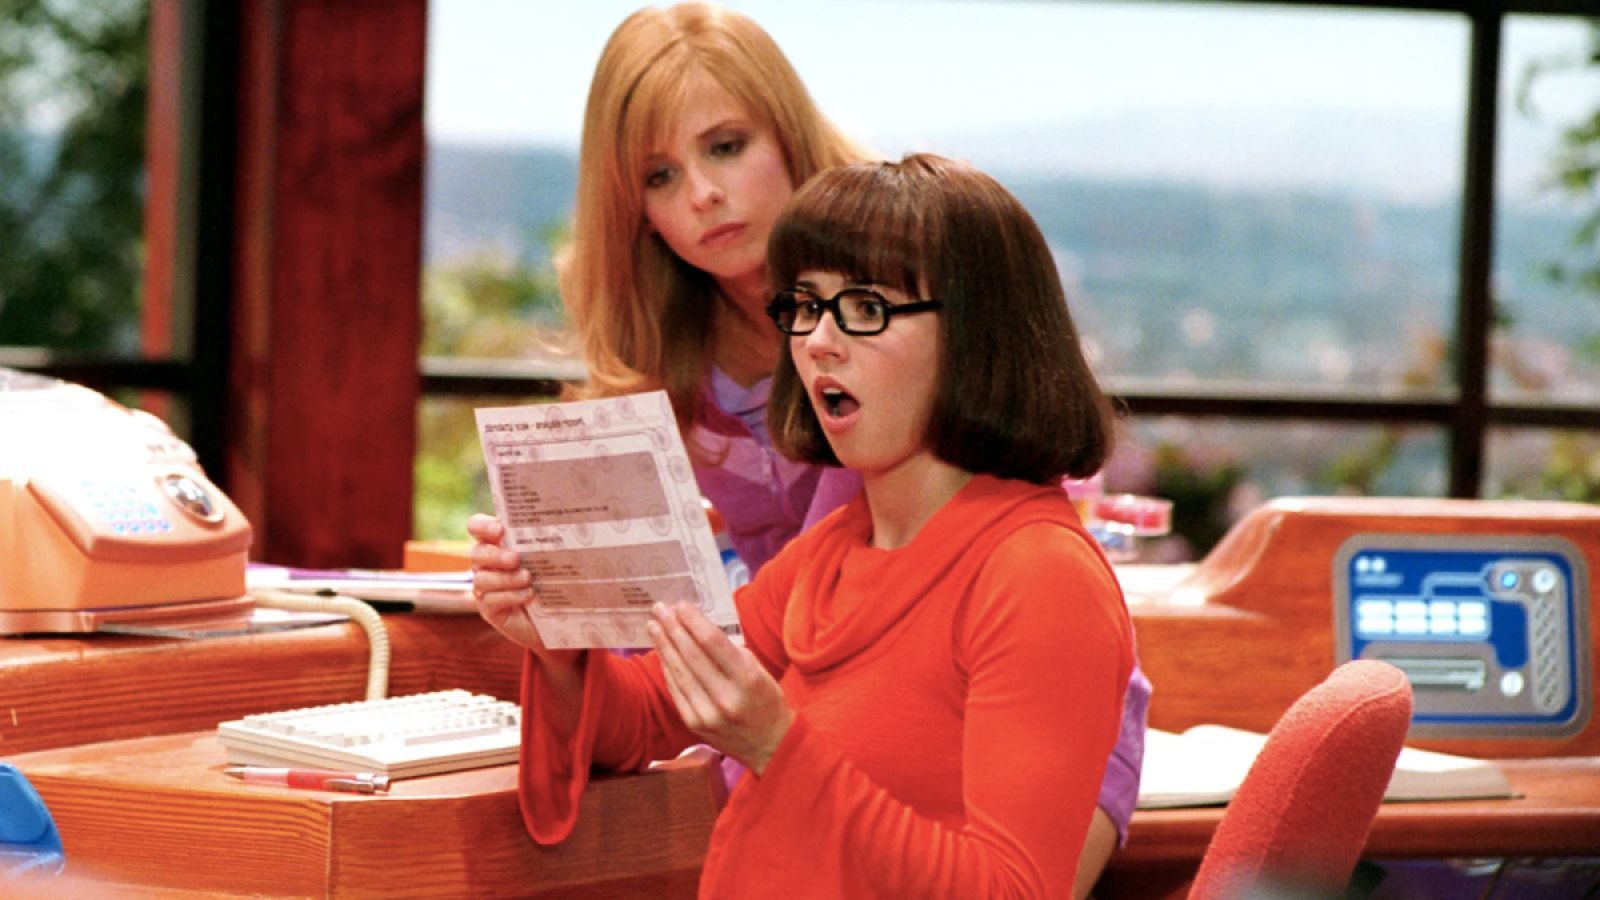 Daphne and Velma in Scooby Doo 2